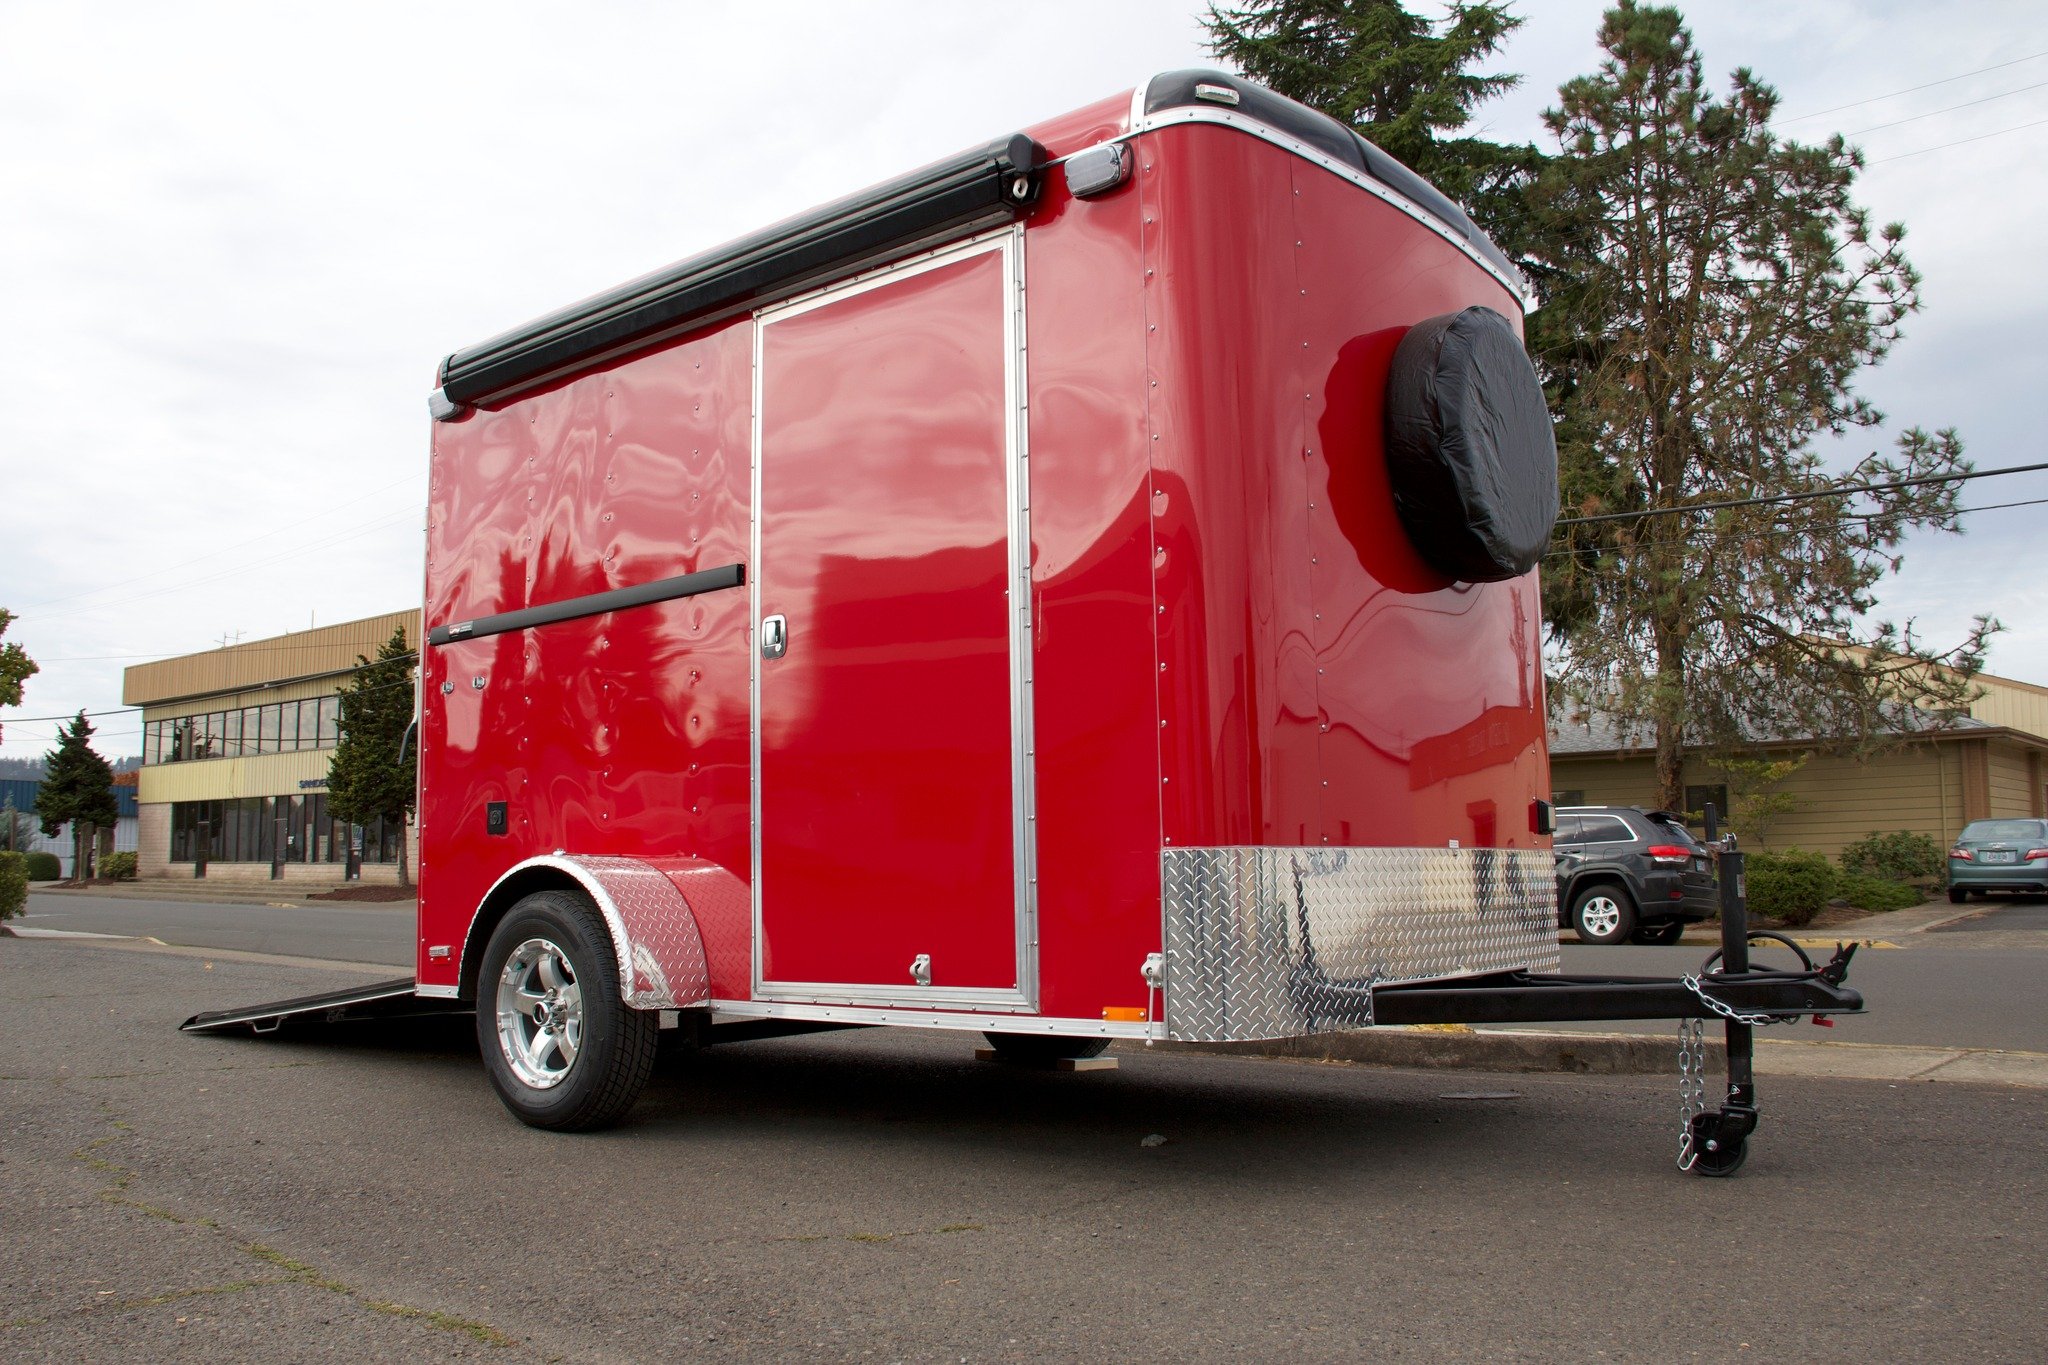 Western Shelter: Where firefighter safety meets complete recovery. 🤝

Our rehab trailers offer a comfortable and functional space for first responders to recharge after a tough call.

Keep your firefighters safe and ready to respond!

#FirefighterRe